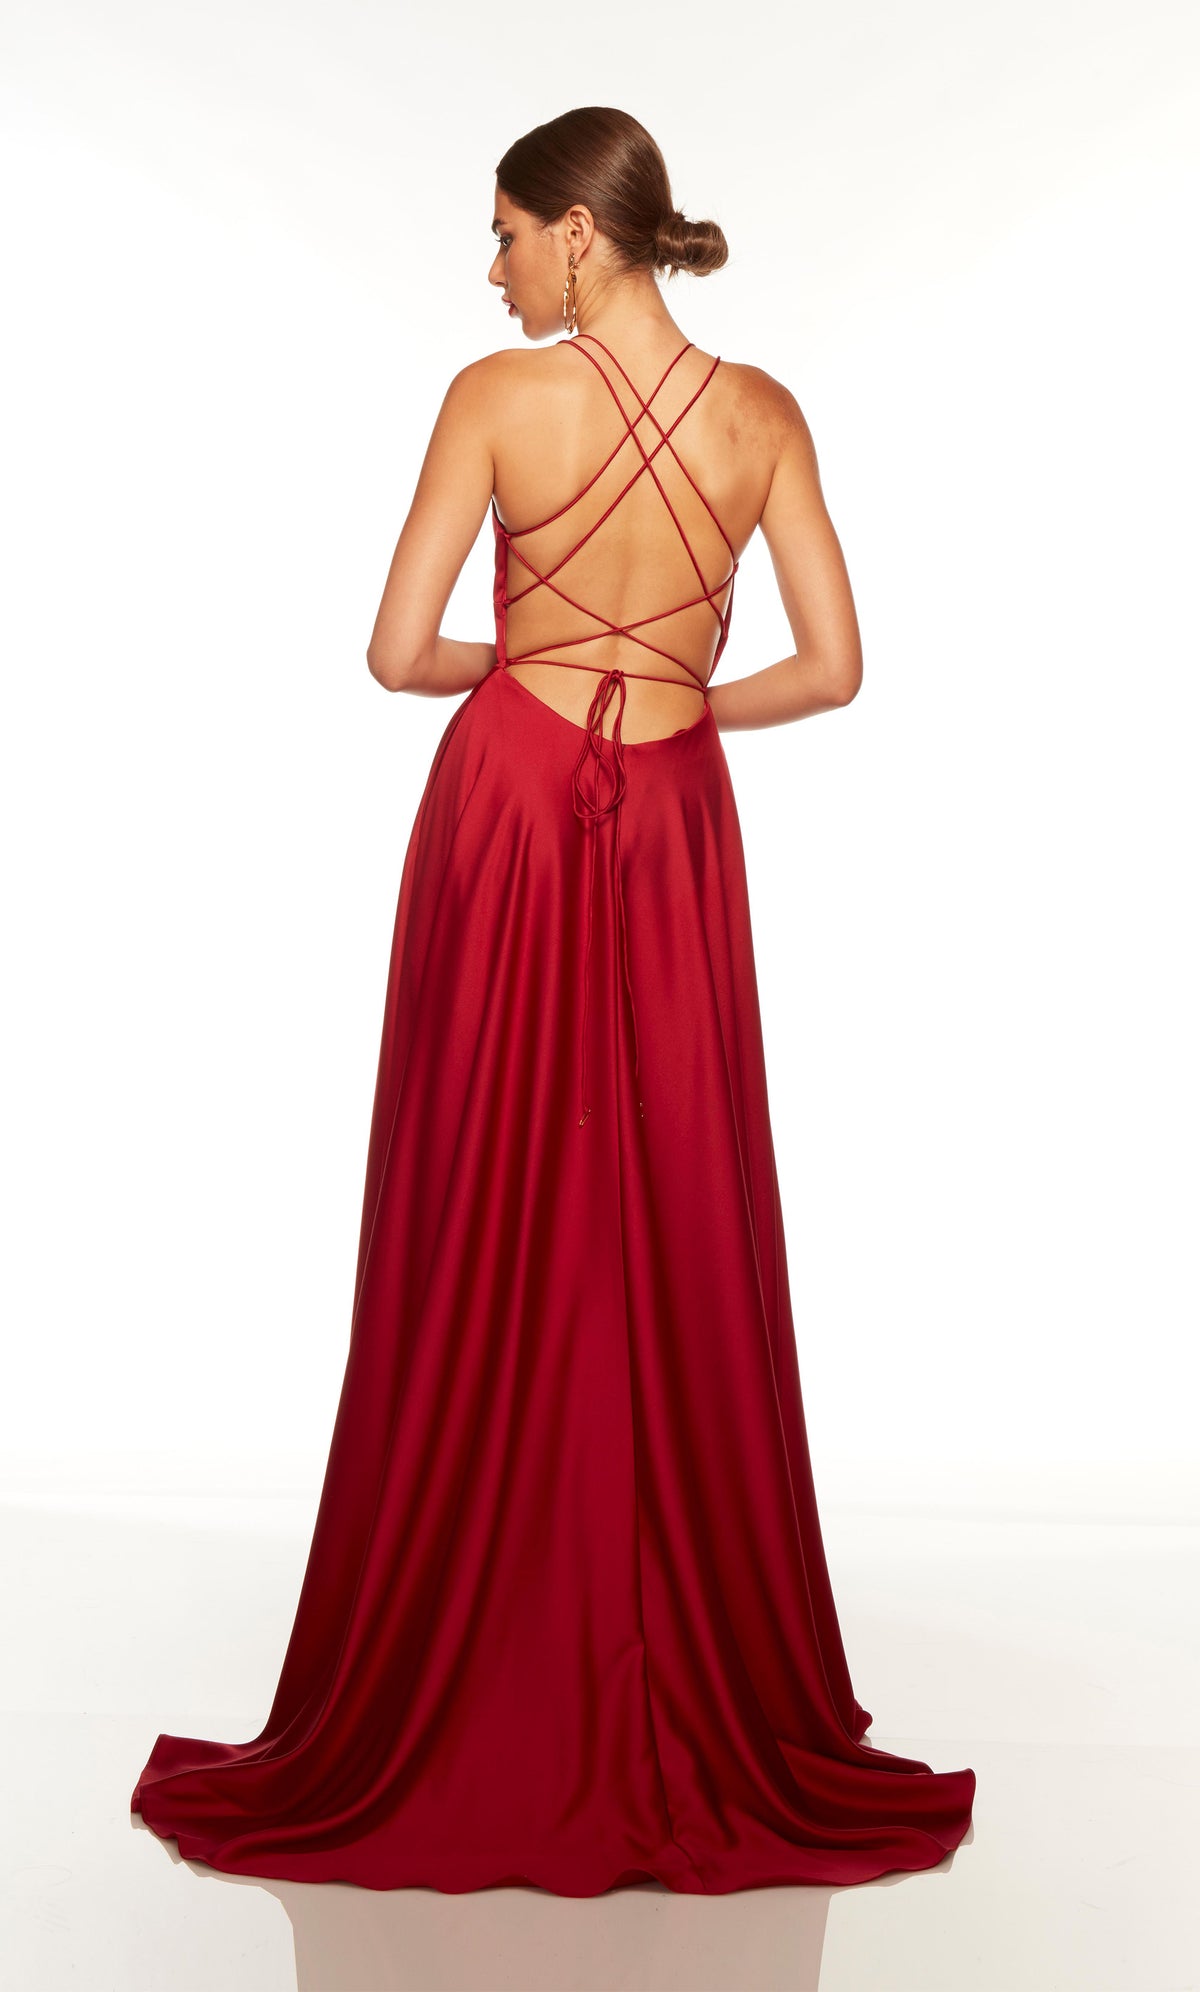 Long formal dress with a strappy back and train in red.